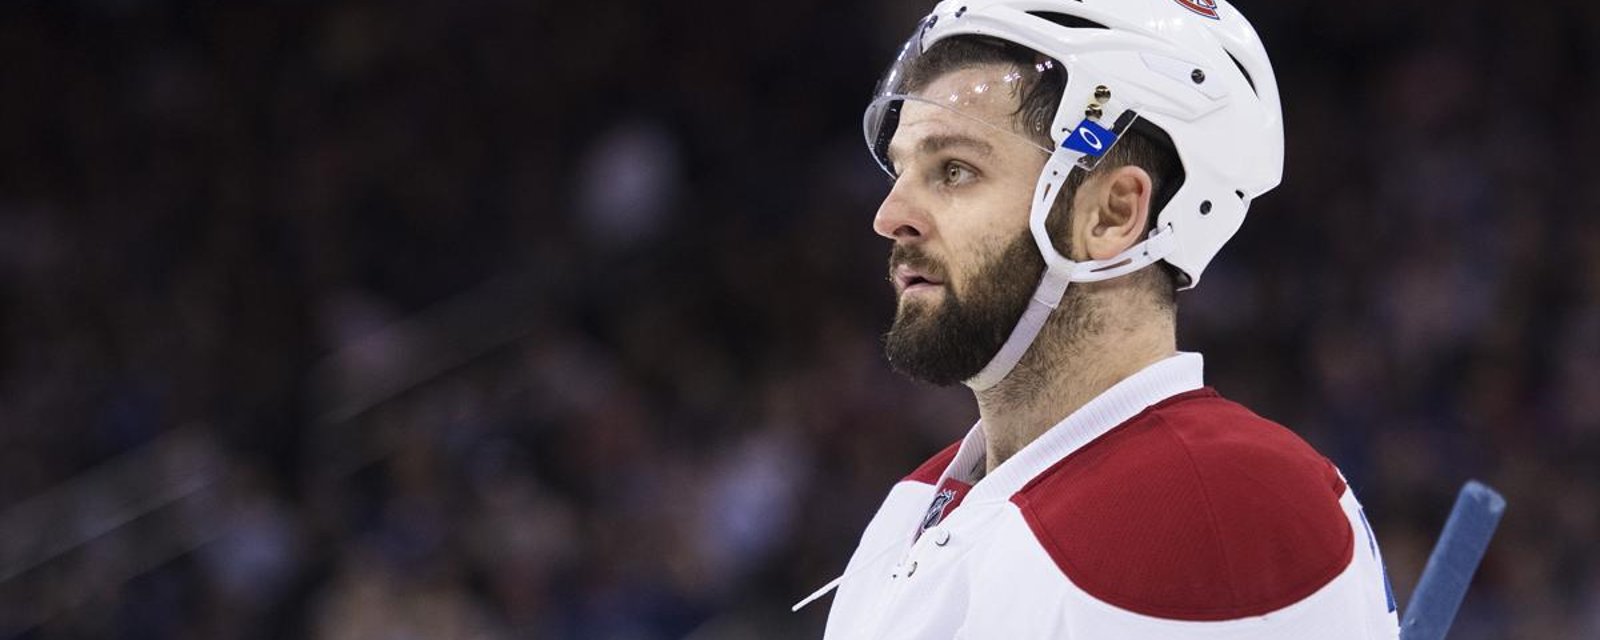 Report : We know more about Radulov's demands and concessions. 